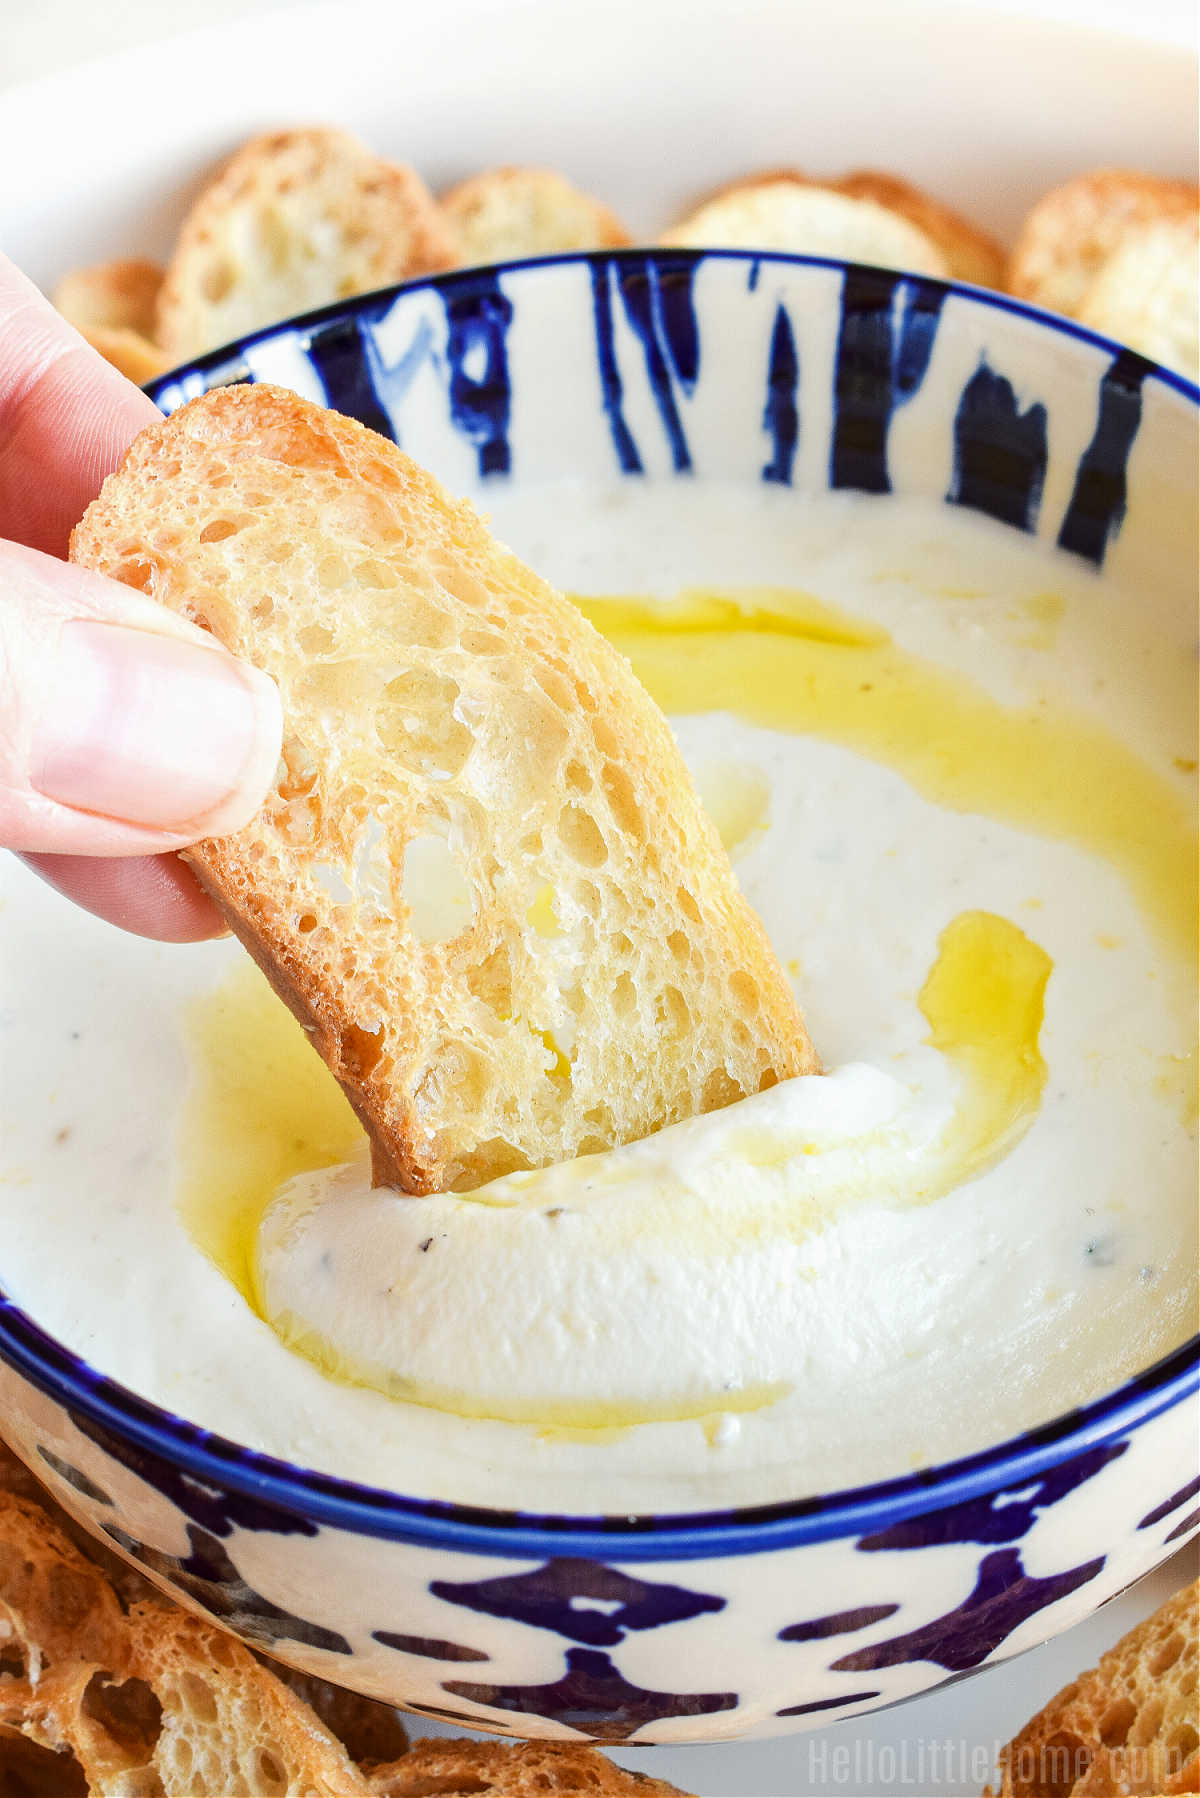 A hand scooping up the dip with crostini.